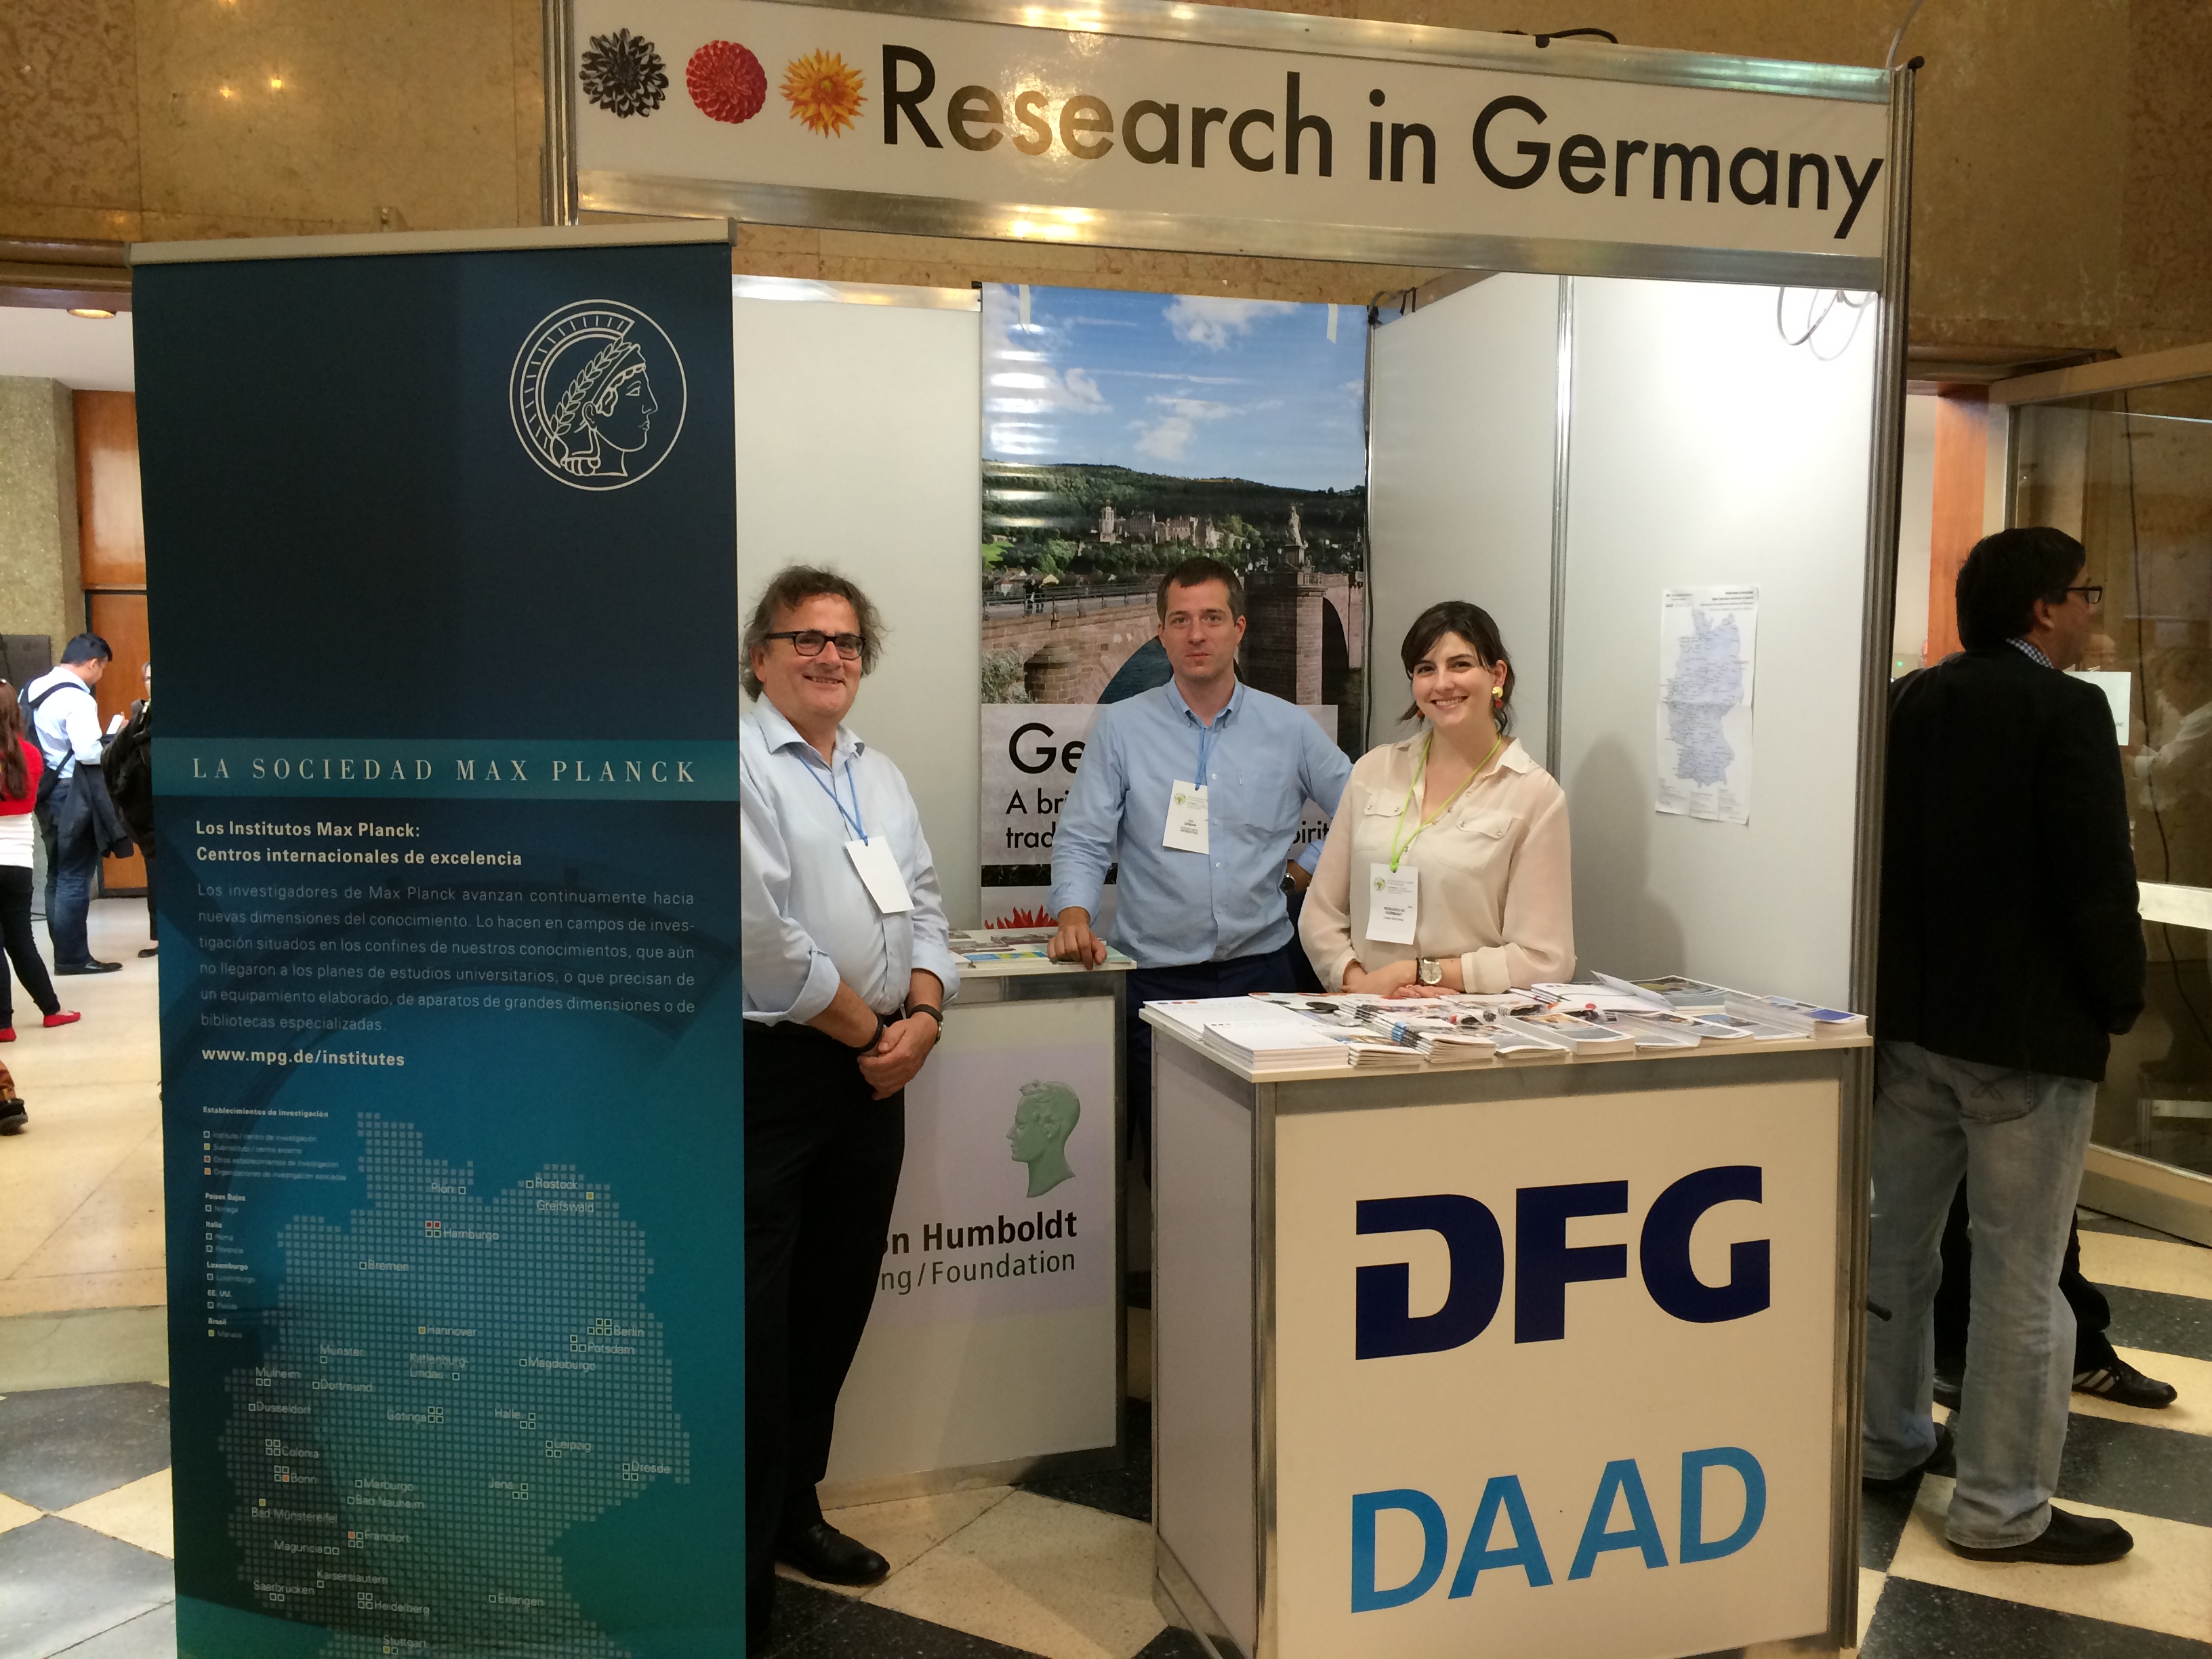 From left to right: Dr. Andreas Trepte (MPG), Dr. Urs Urban (DAAD) and Laura Redondo (DFG) provided information at the